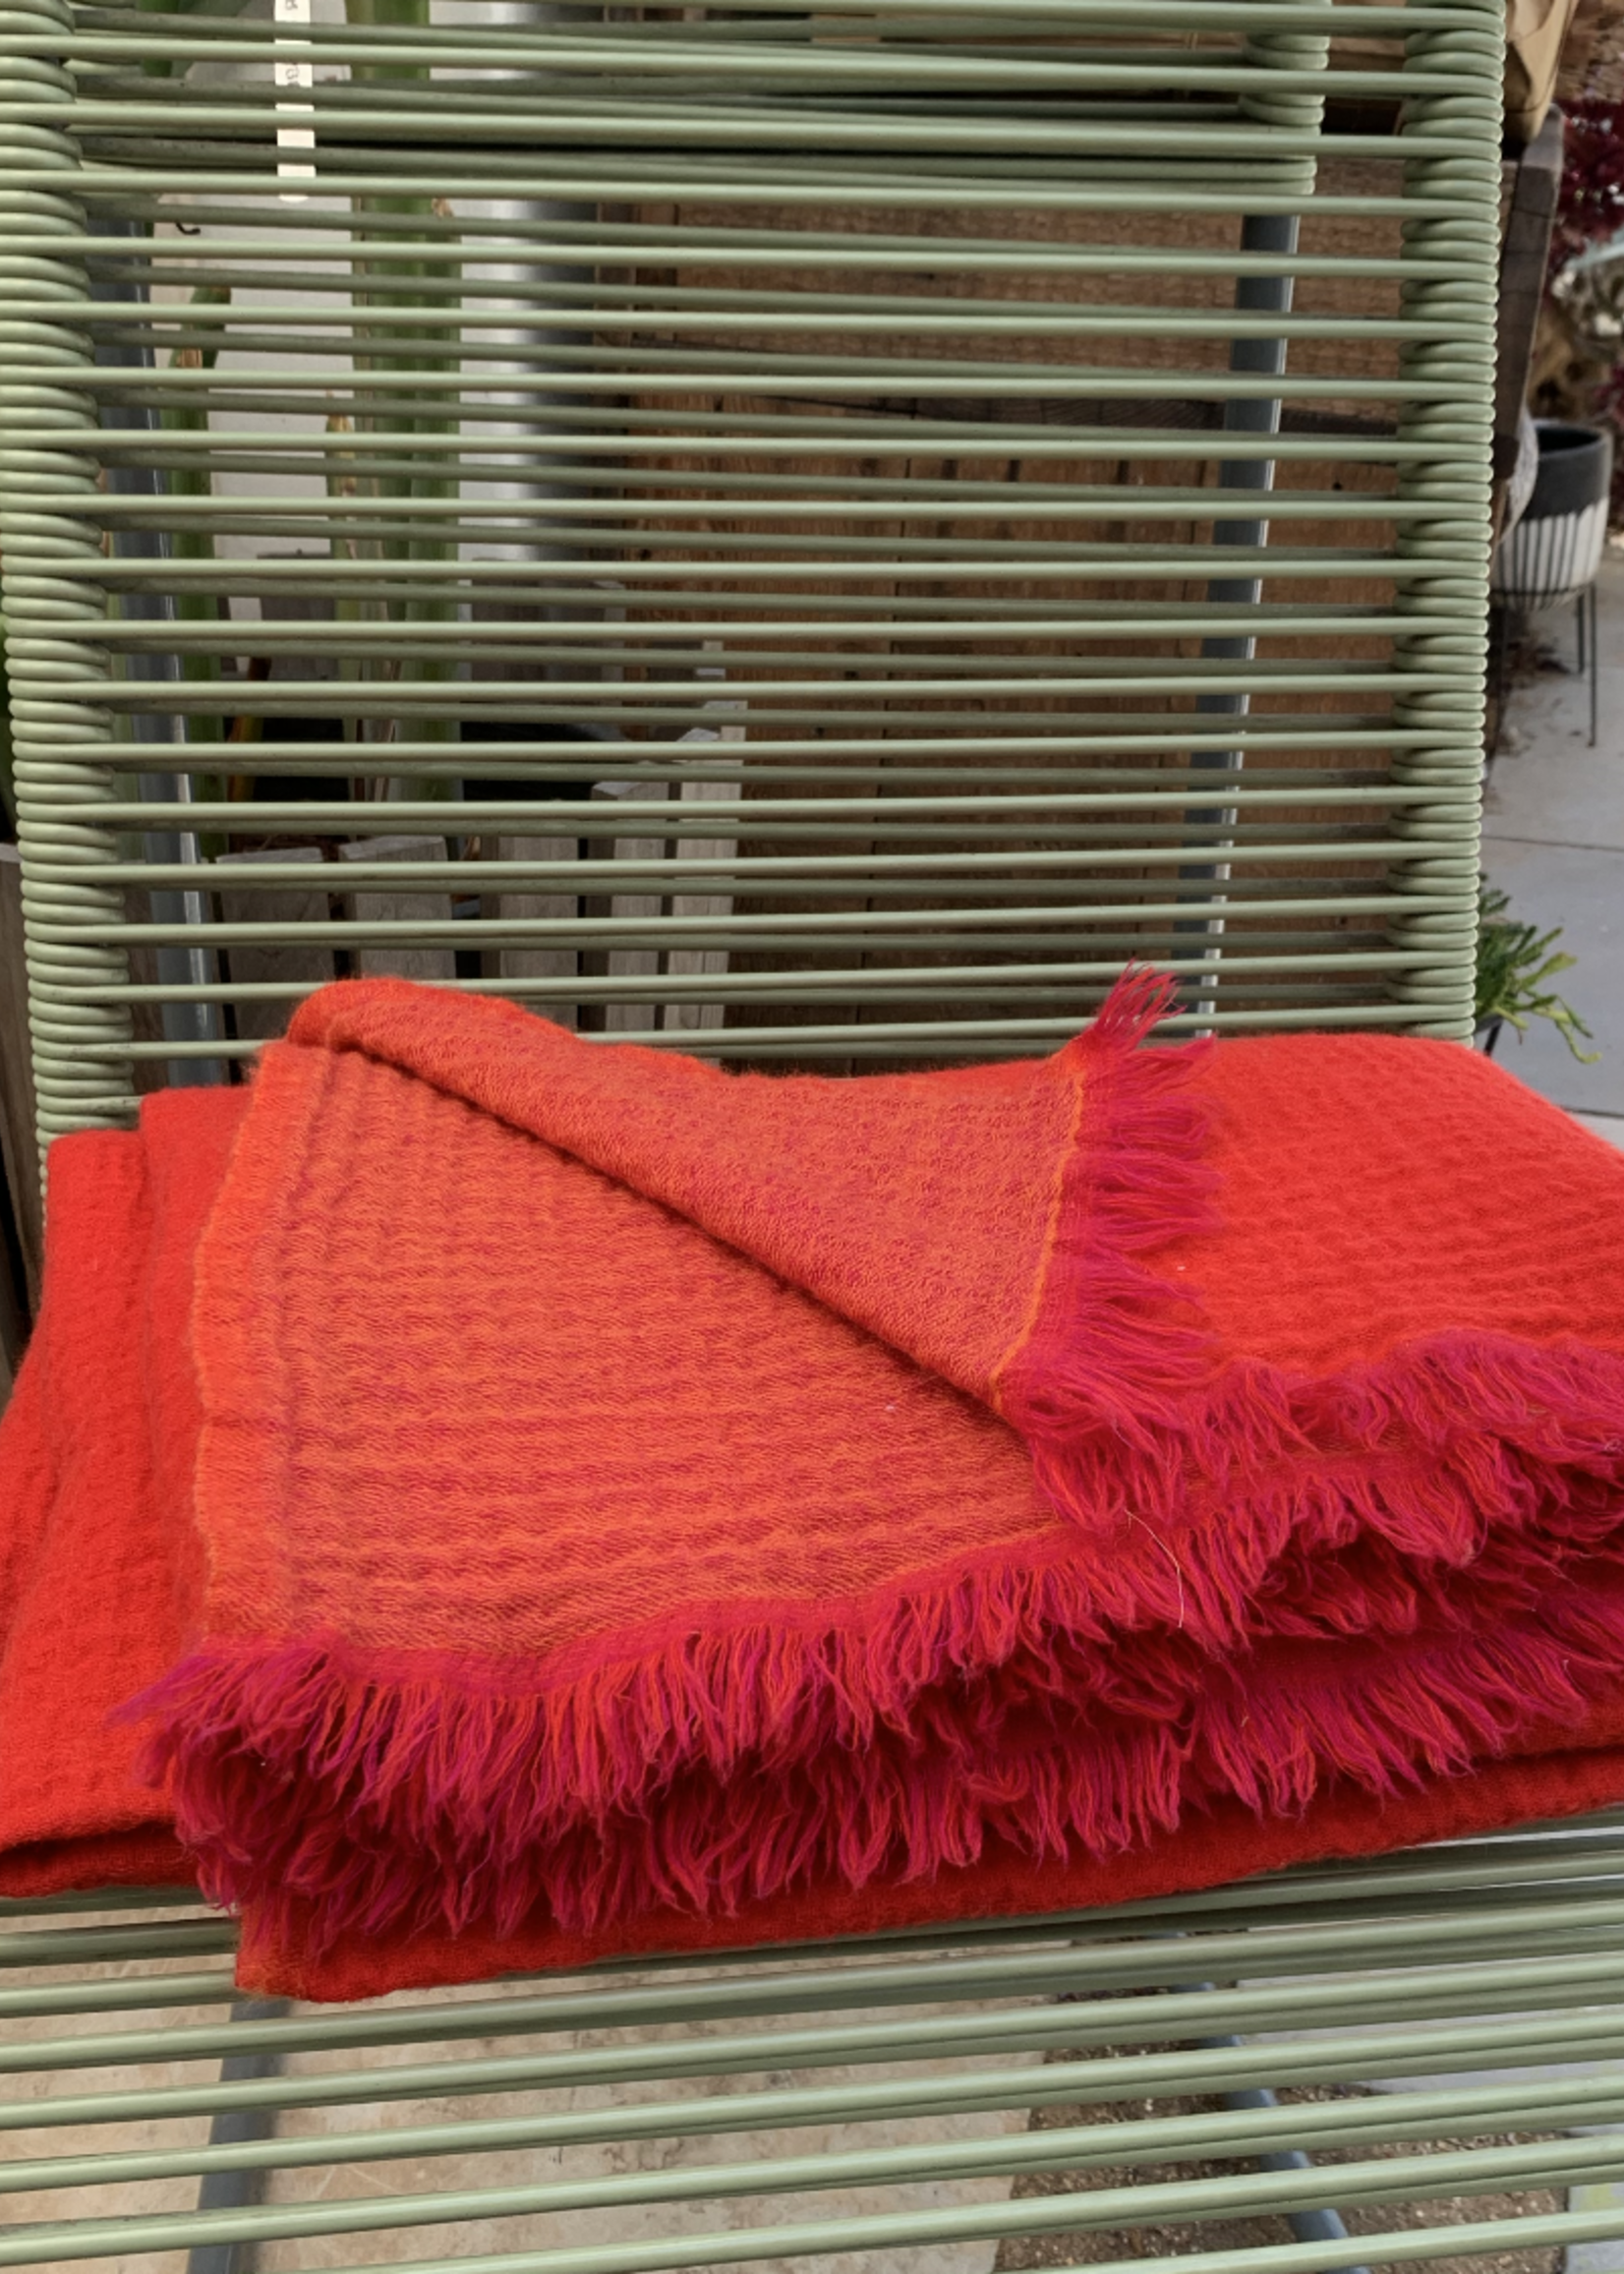 Boiled Wool Blanket 100% MADE IN India